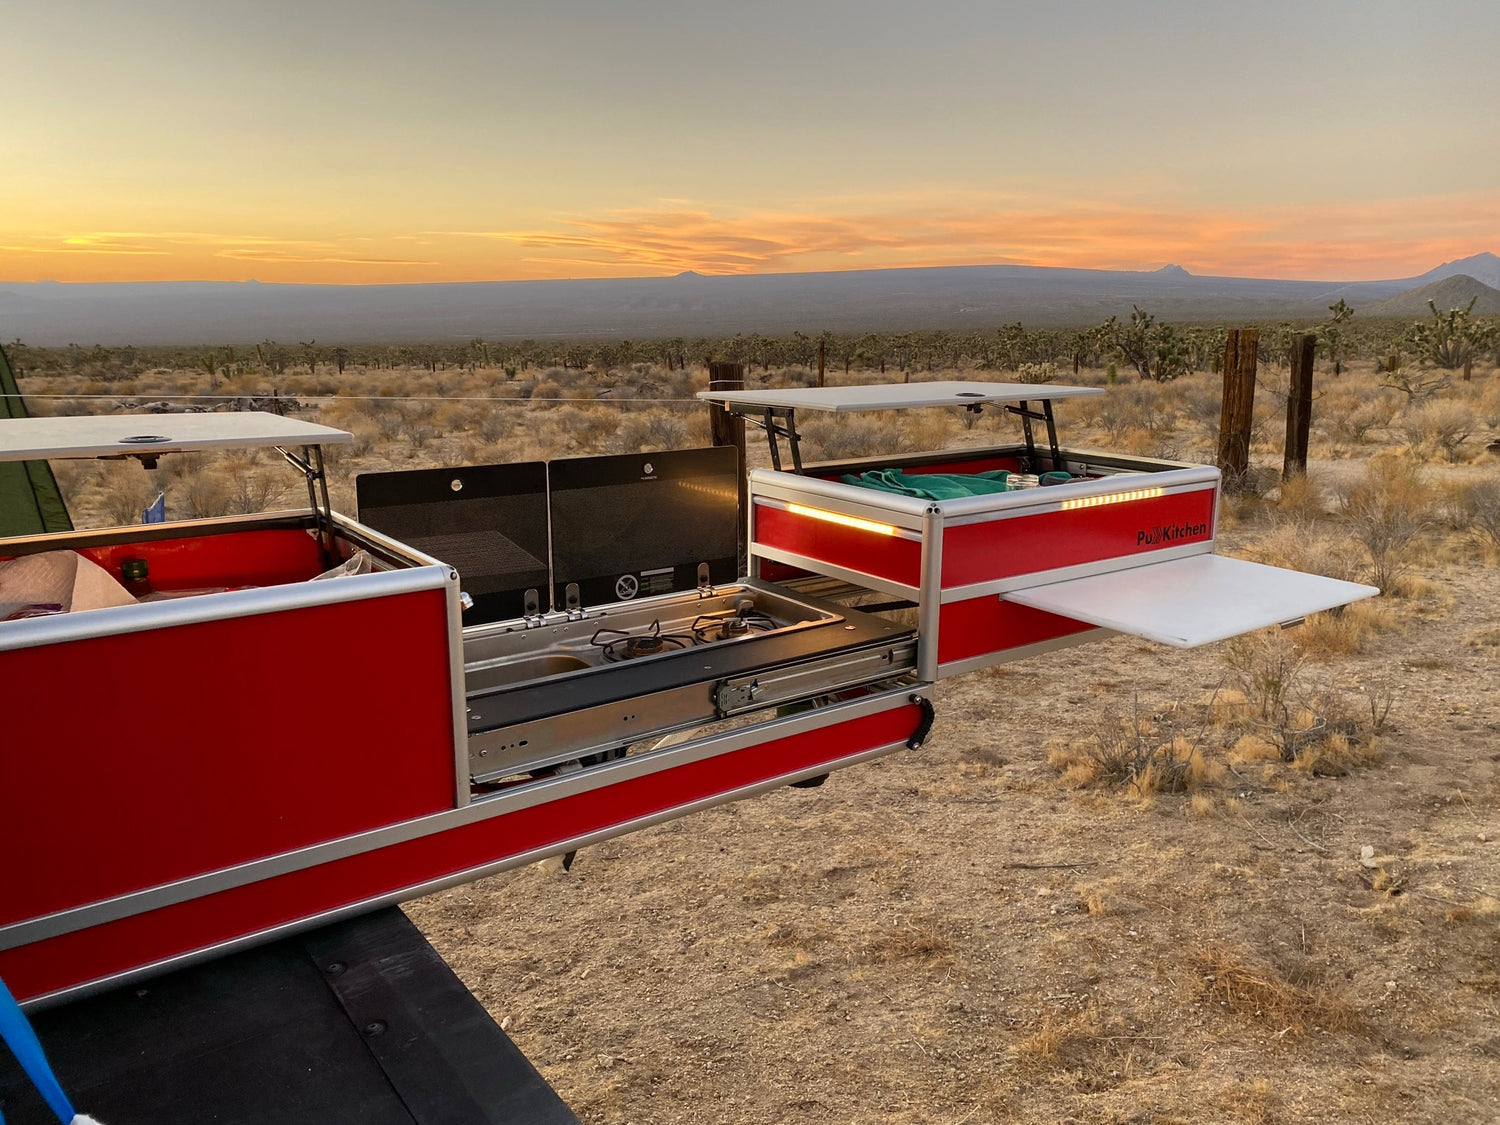 PullKitchen - Overland slide out camping truck kitchen mounted in a truck bed located in the Mojave desert preparing food during sunset